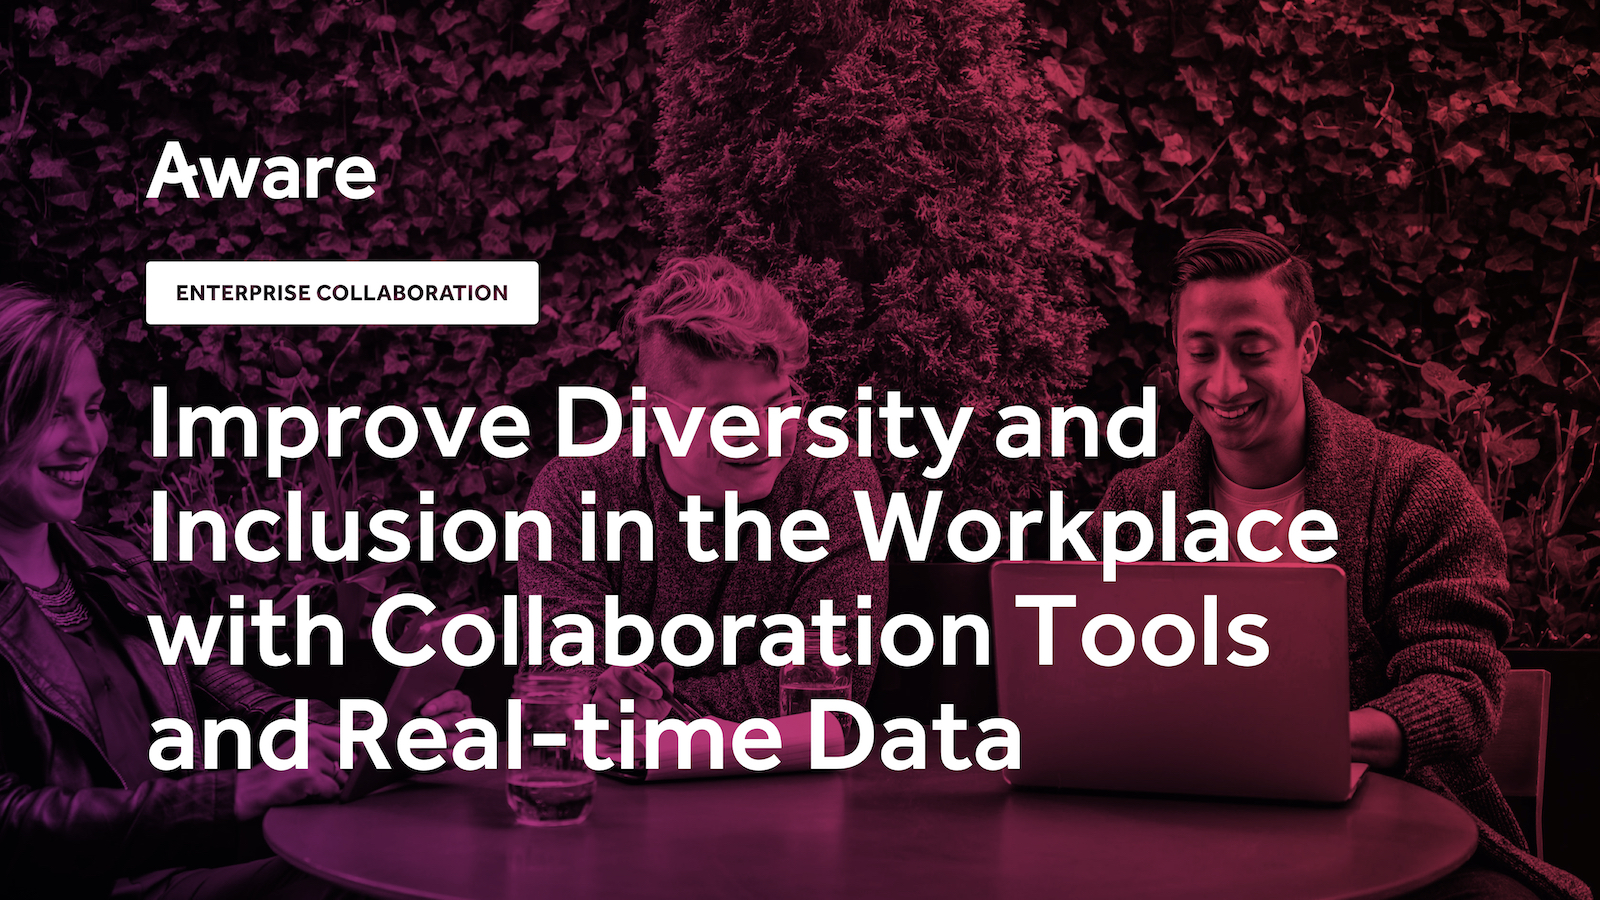 Improve Diversity and Inclusion in the Workplace with Collaboration Tools and Continuous Insights